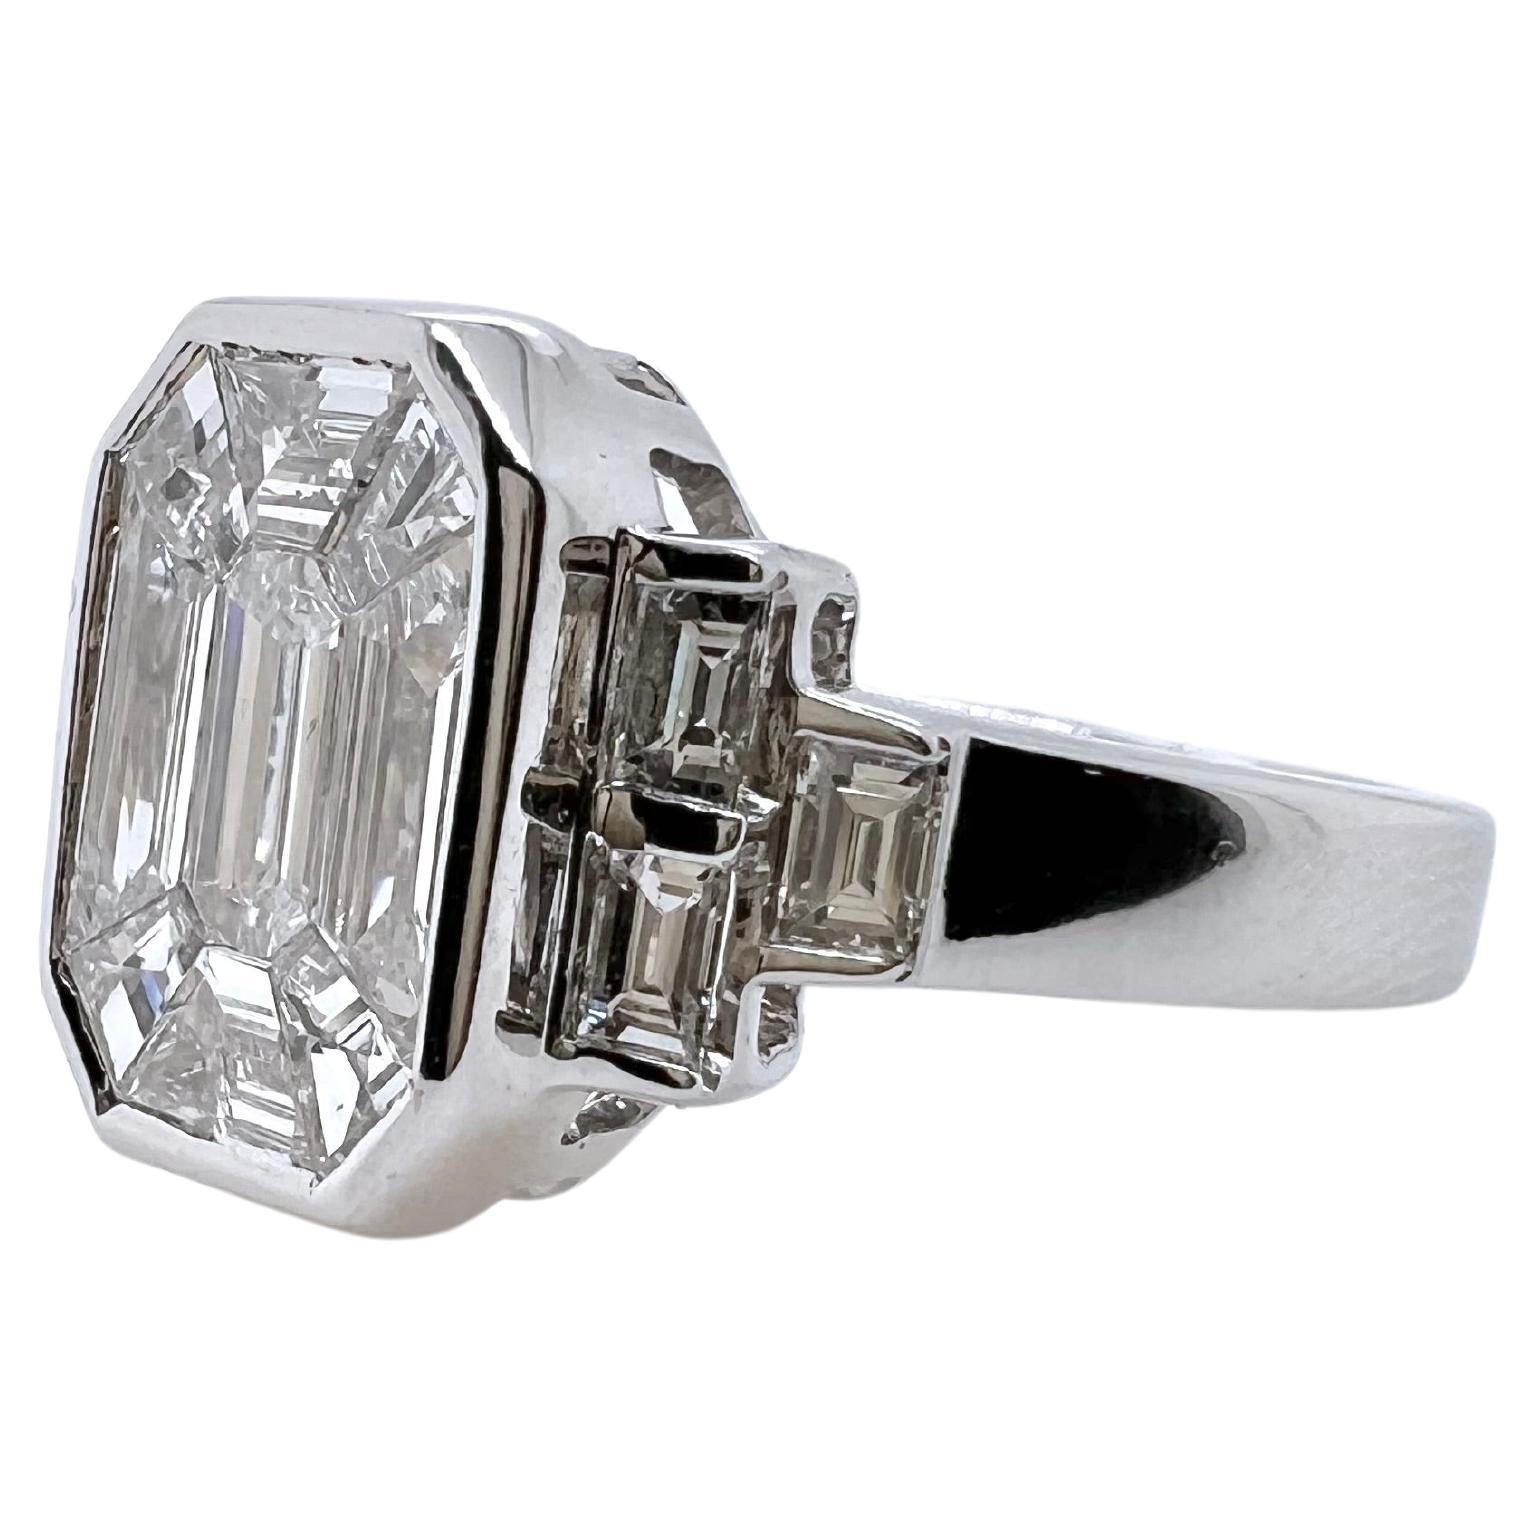 This ring is extremely difficult to make and is a piece of art! The center is an illusion of a larger emerald cut diamond but in fact, is comprised of baguettes and a smaller emerald cut. The baguettes are specifically cut to fit perfectly like a